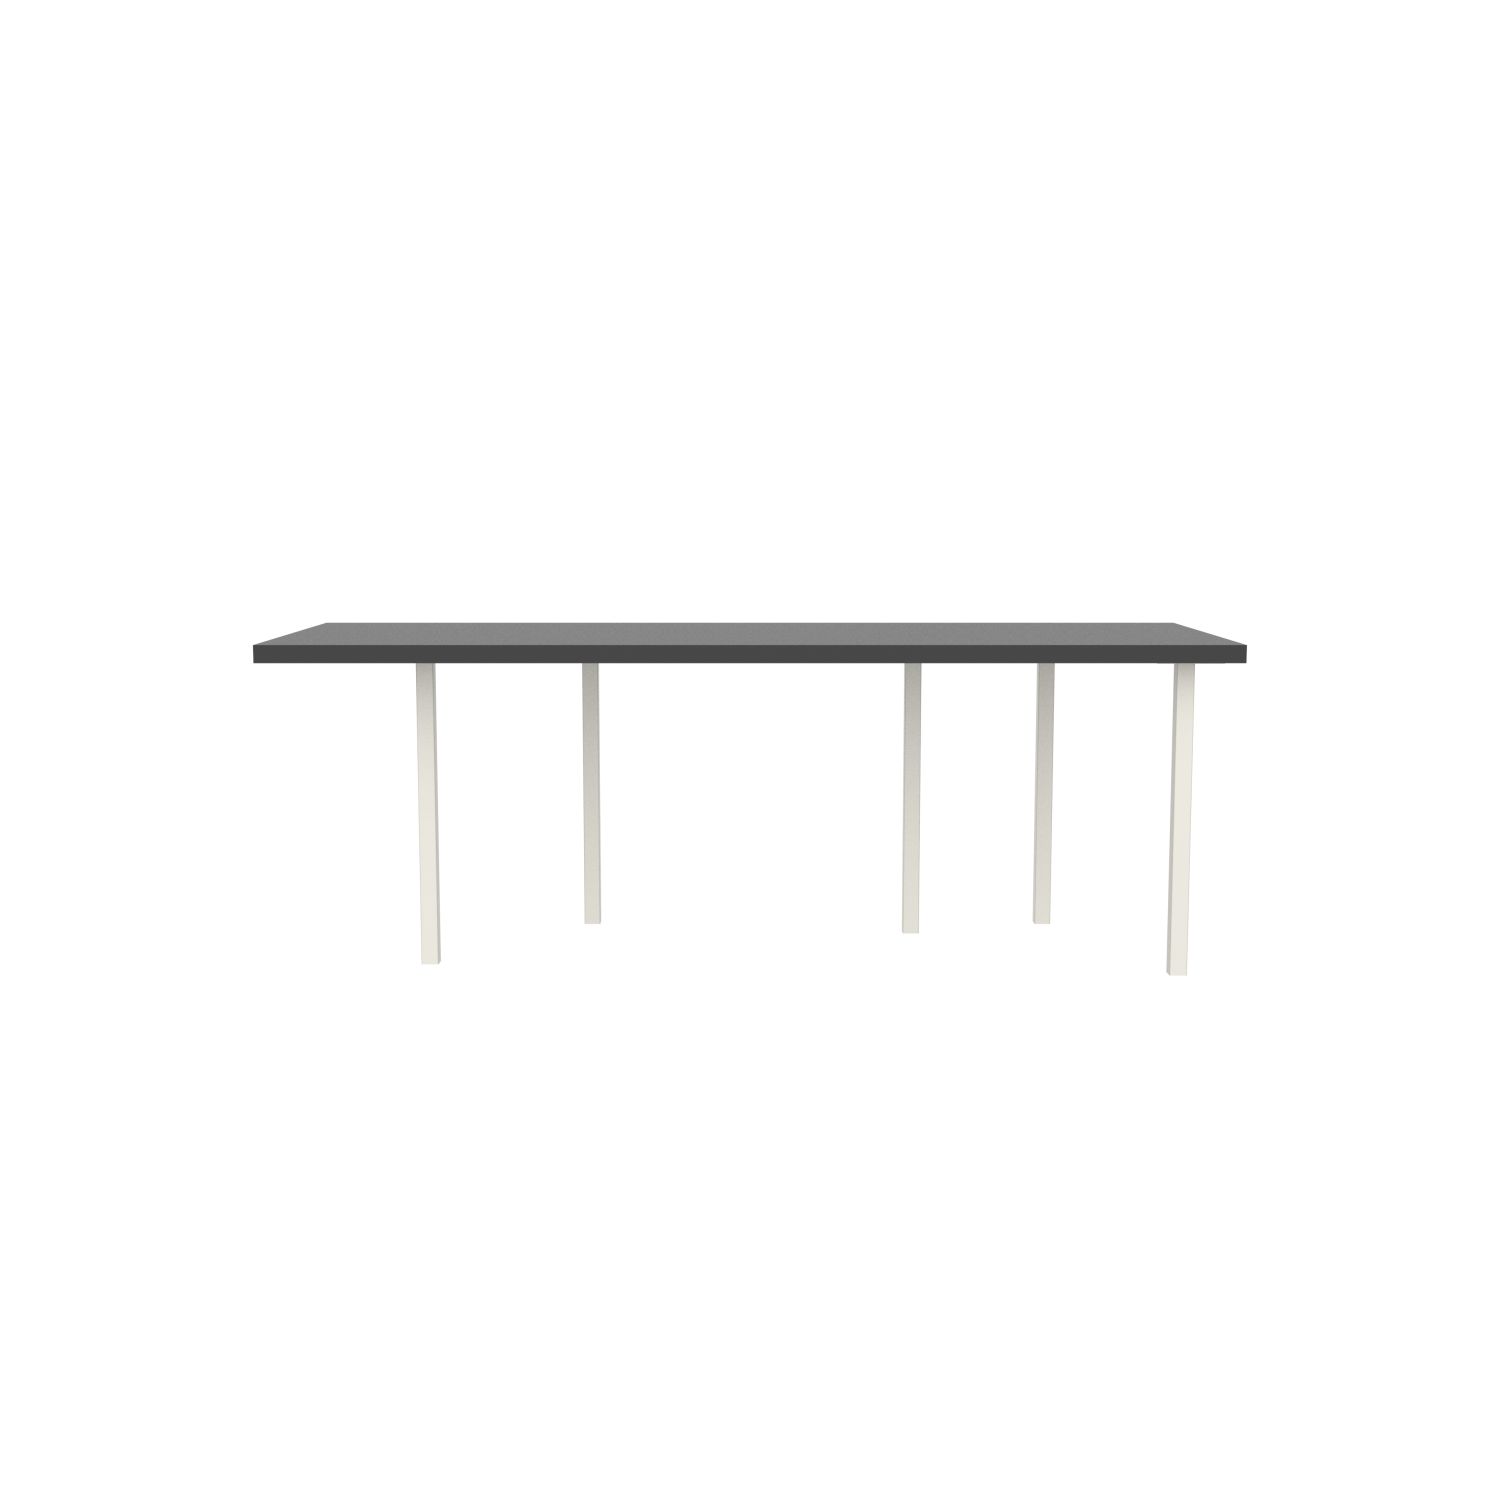 lensvelt bbrand table five fixed heigt 80x218 hpl black 50 mm price level 1 white ral9010